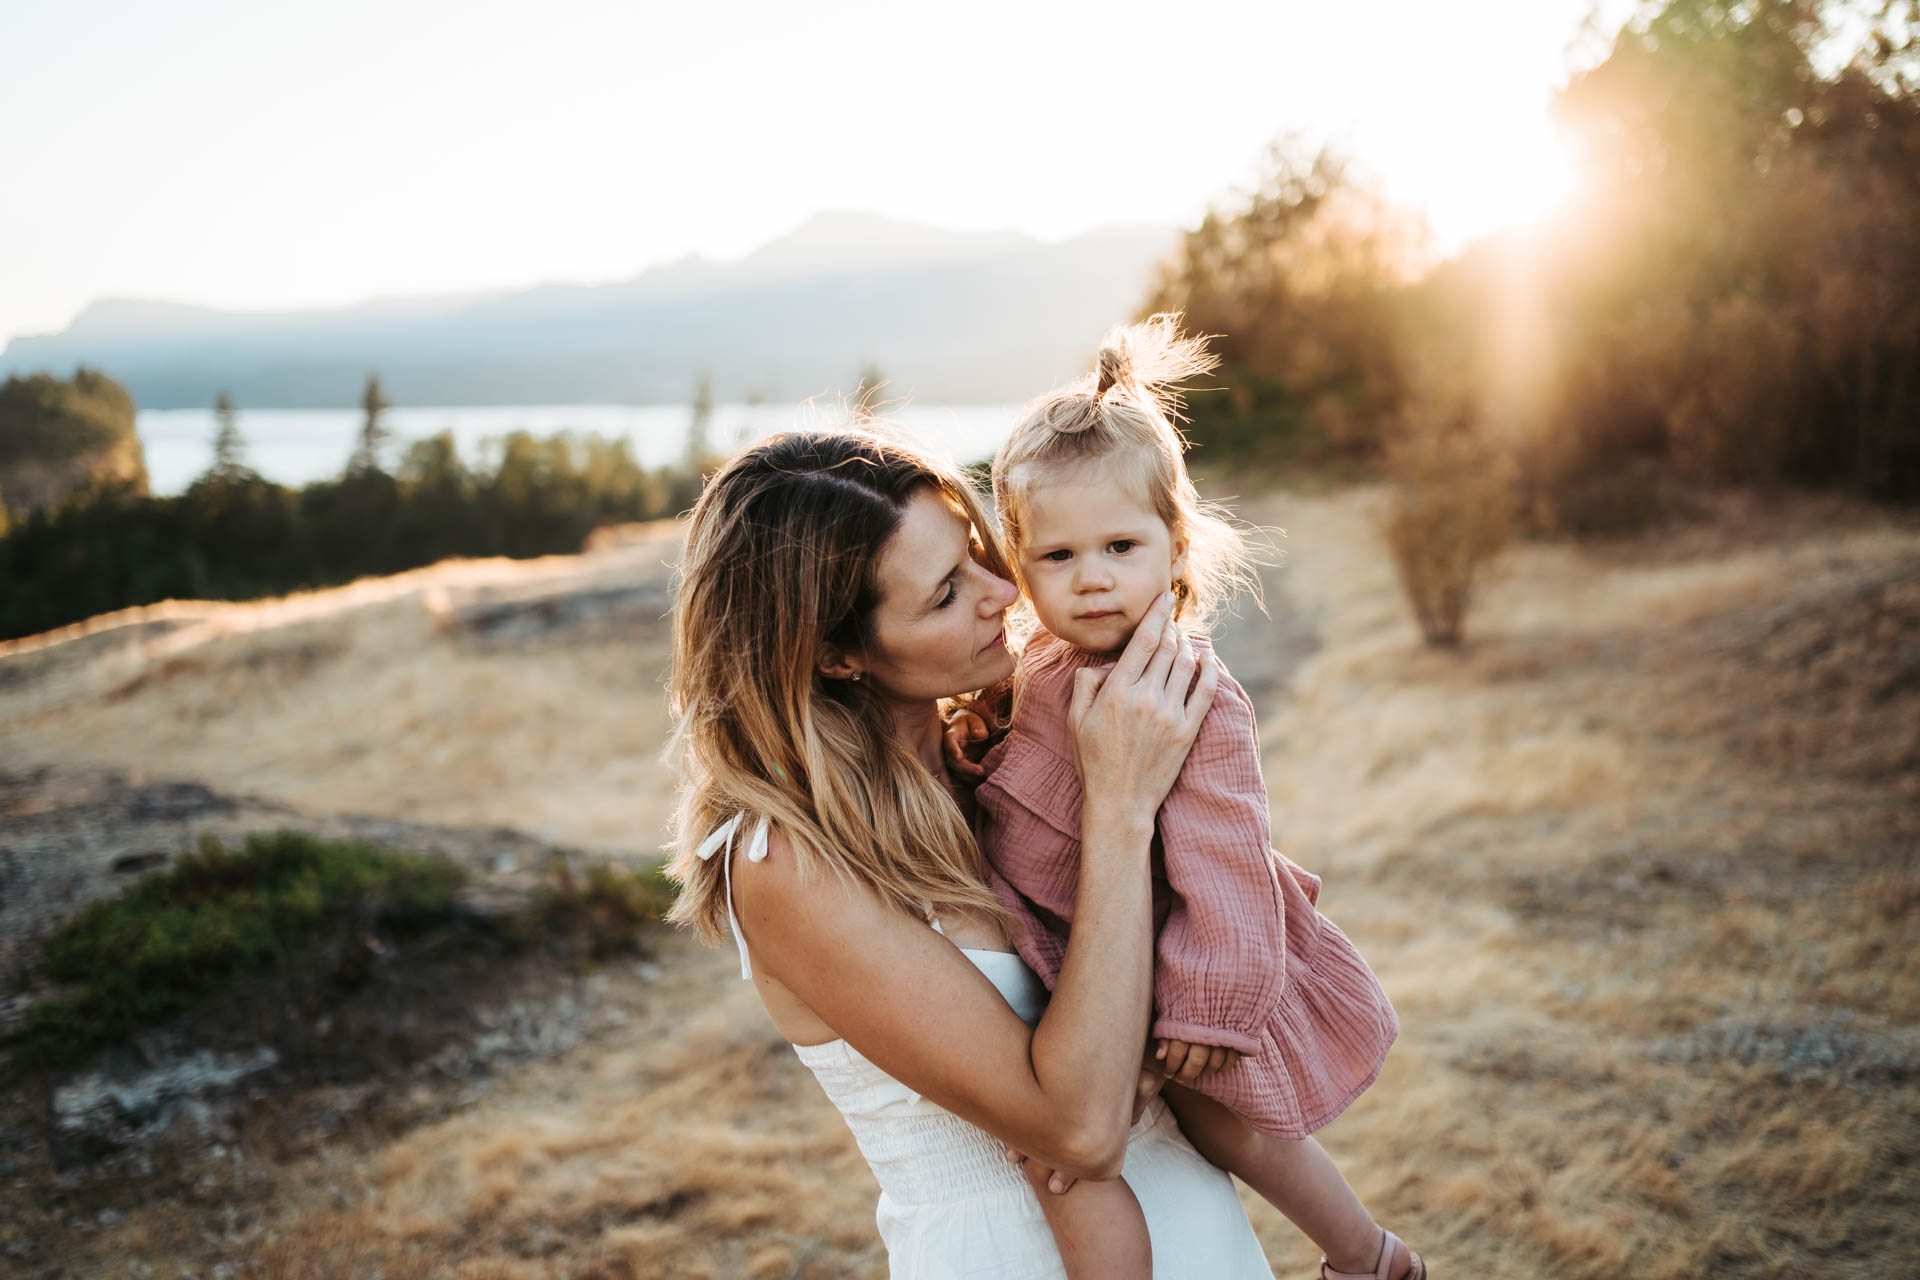 A mom holding her toddler and touching her cheeks in a grass filed in golden light